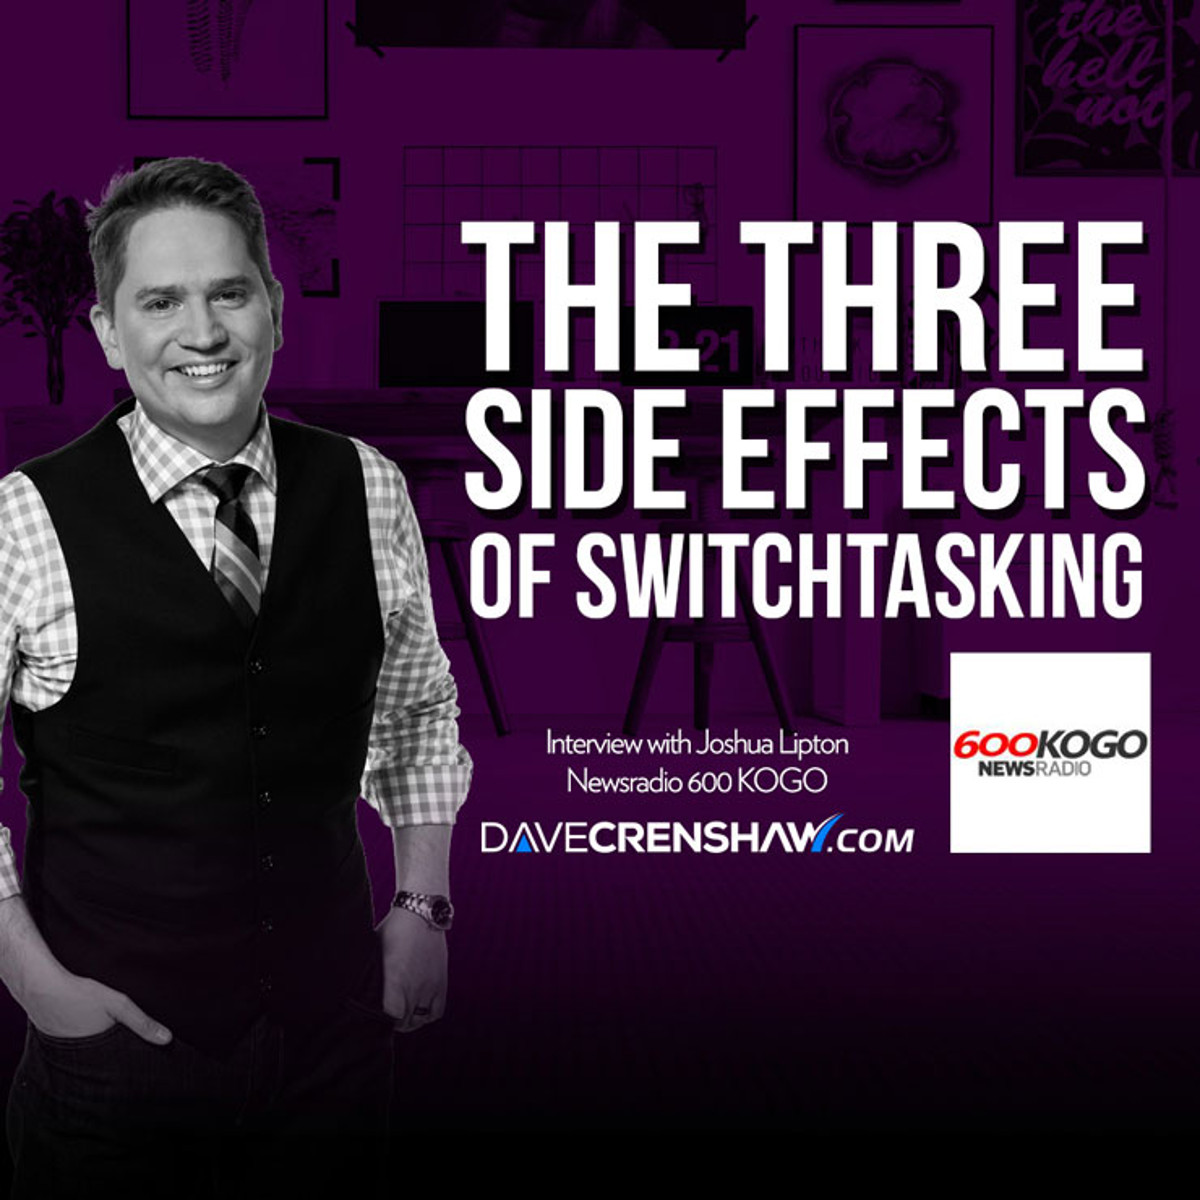 Why you should avoid these three side effects of switchtasking